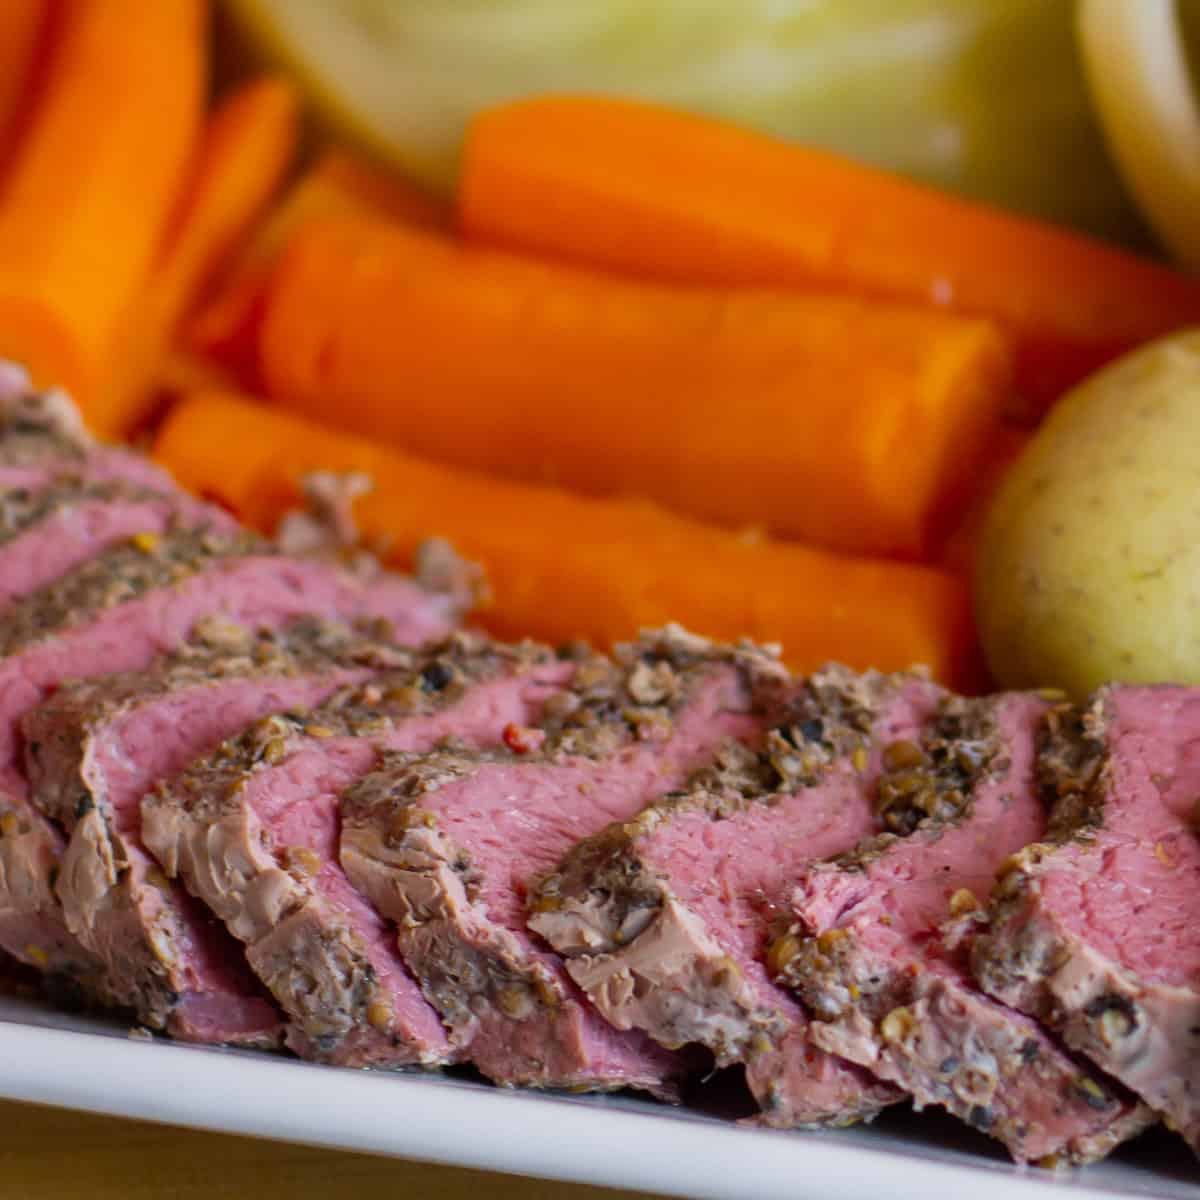 Sliced beef on a platter with carrots and potatoes behind.